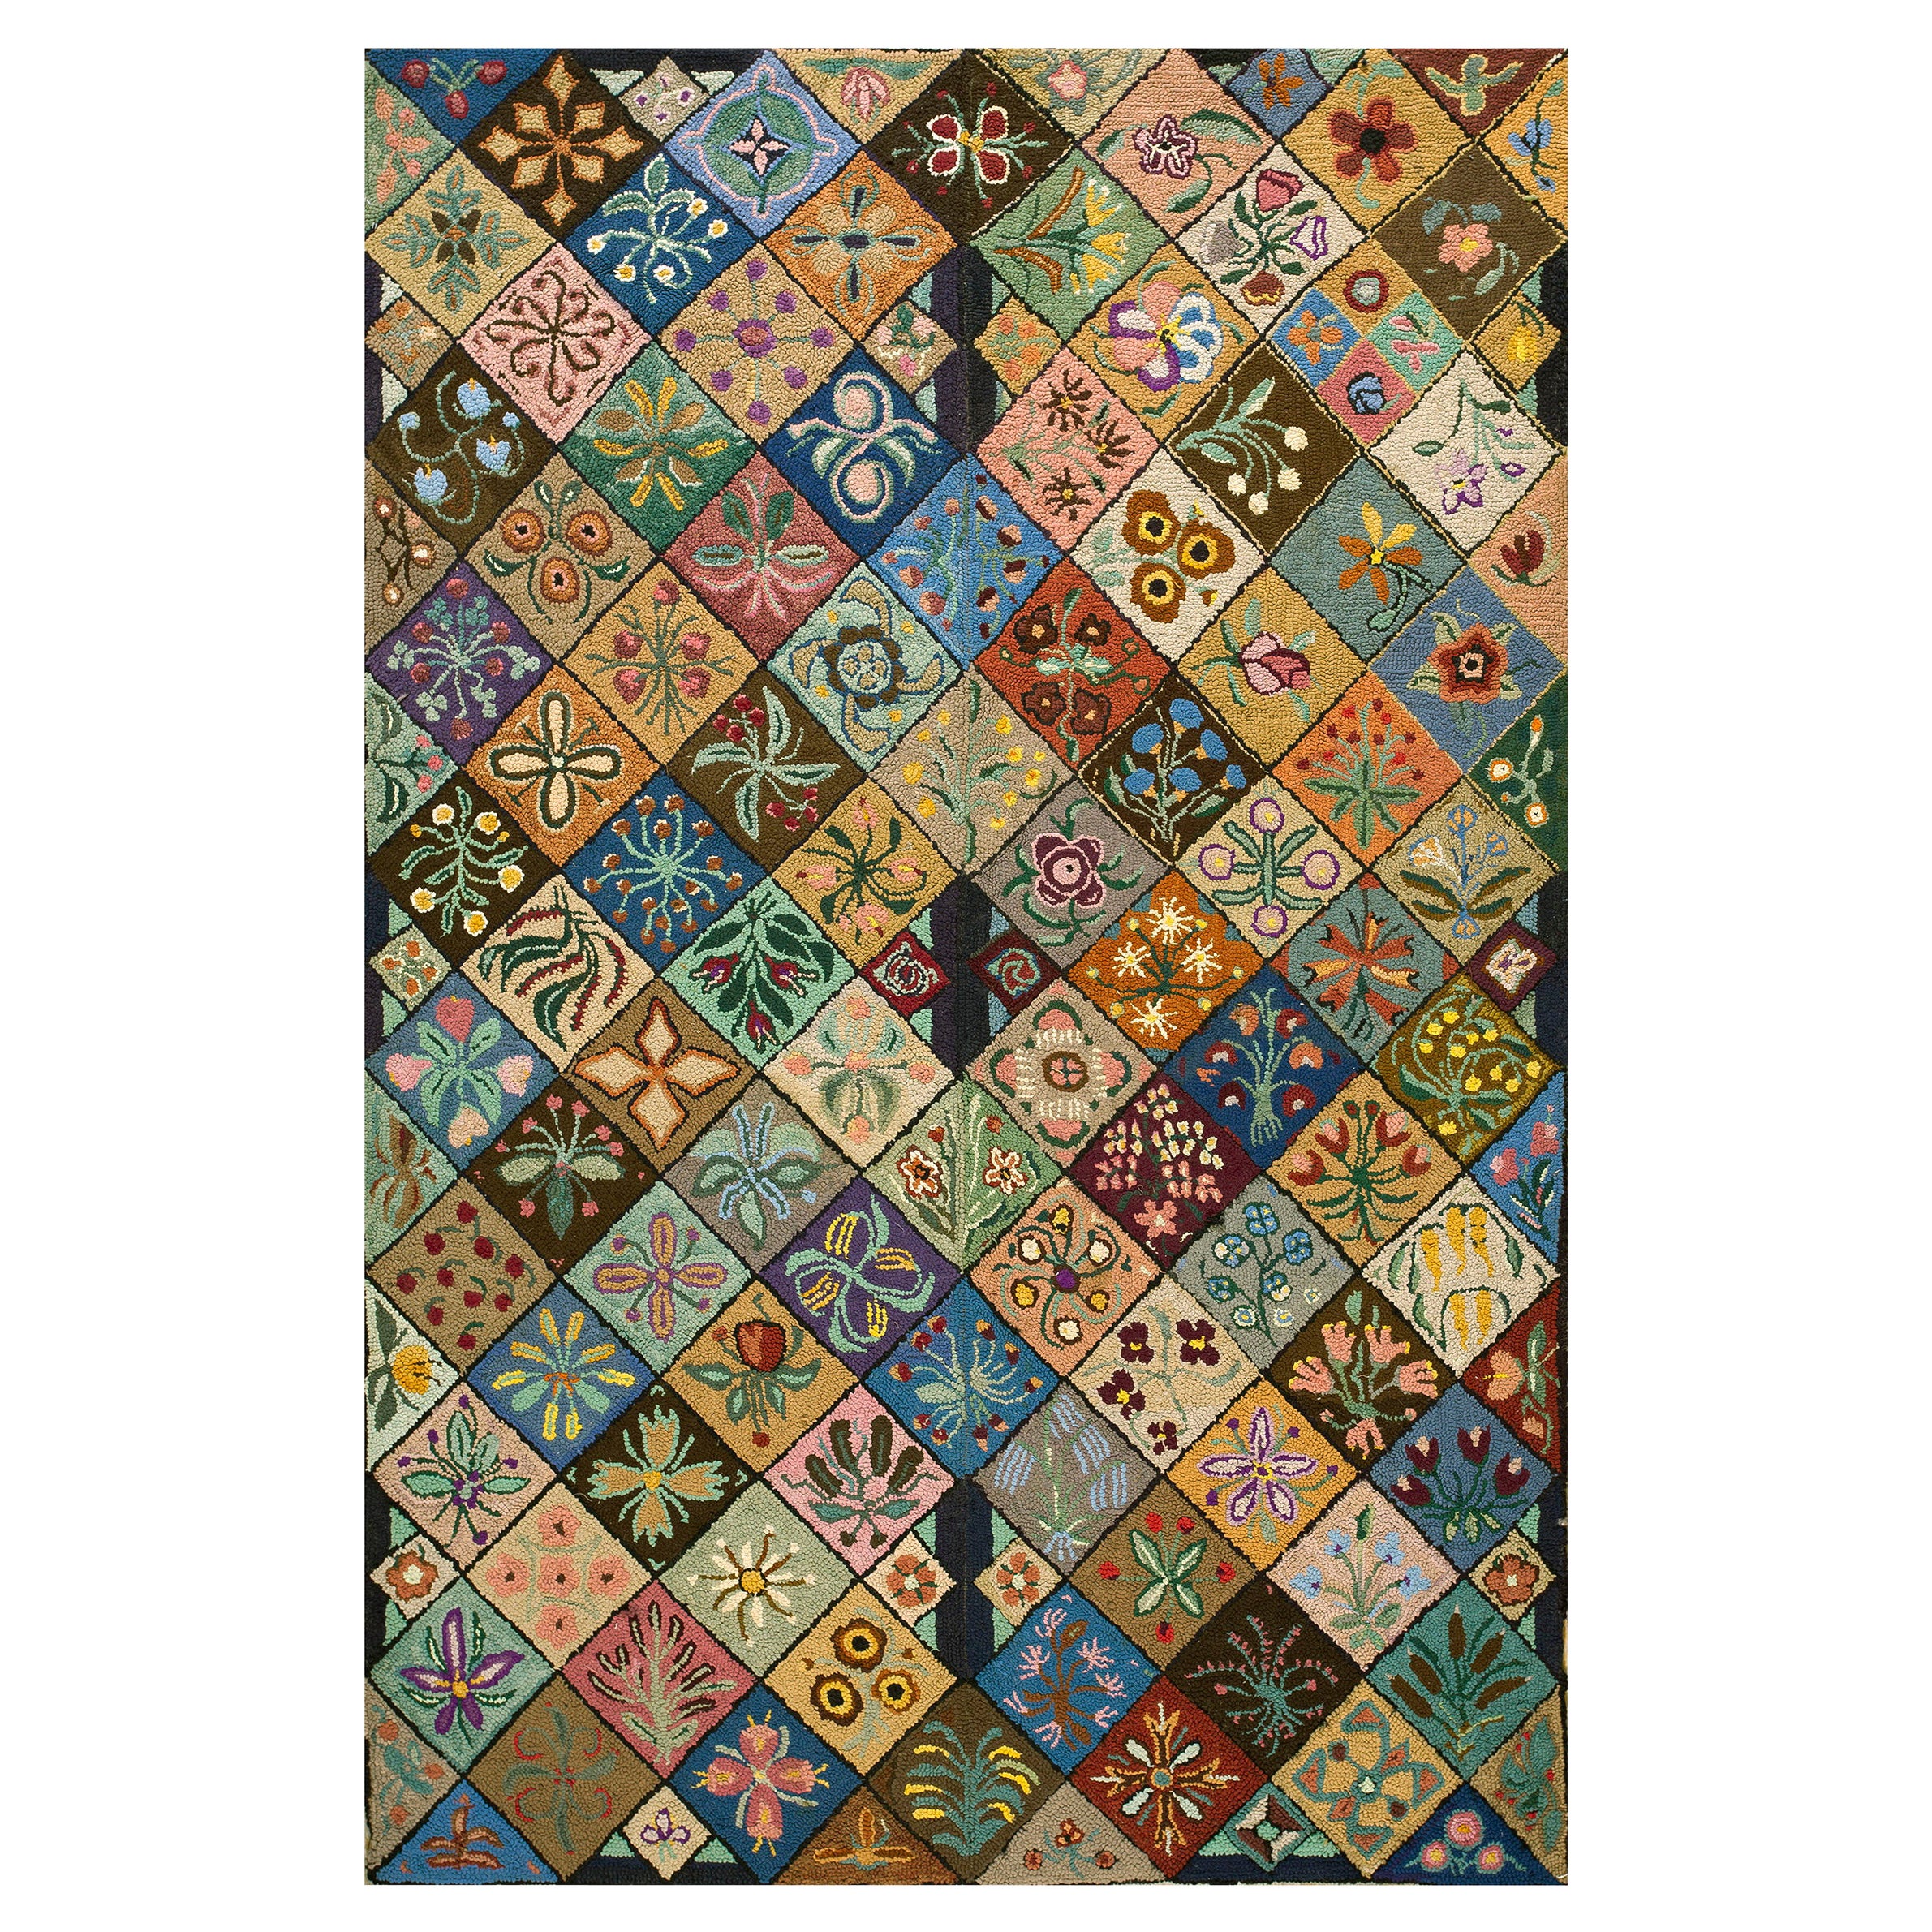 1930s American Hooked Rug ( 6' x 8'9" - 183 x 268 ) For Sale